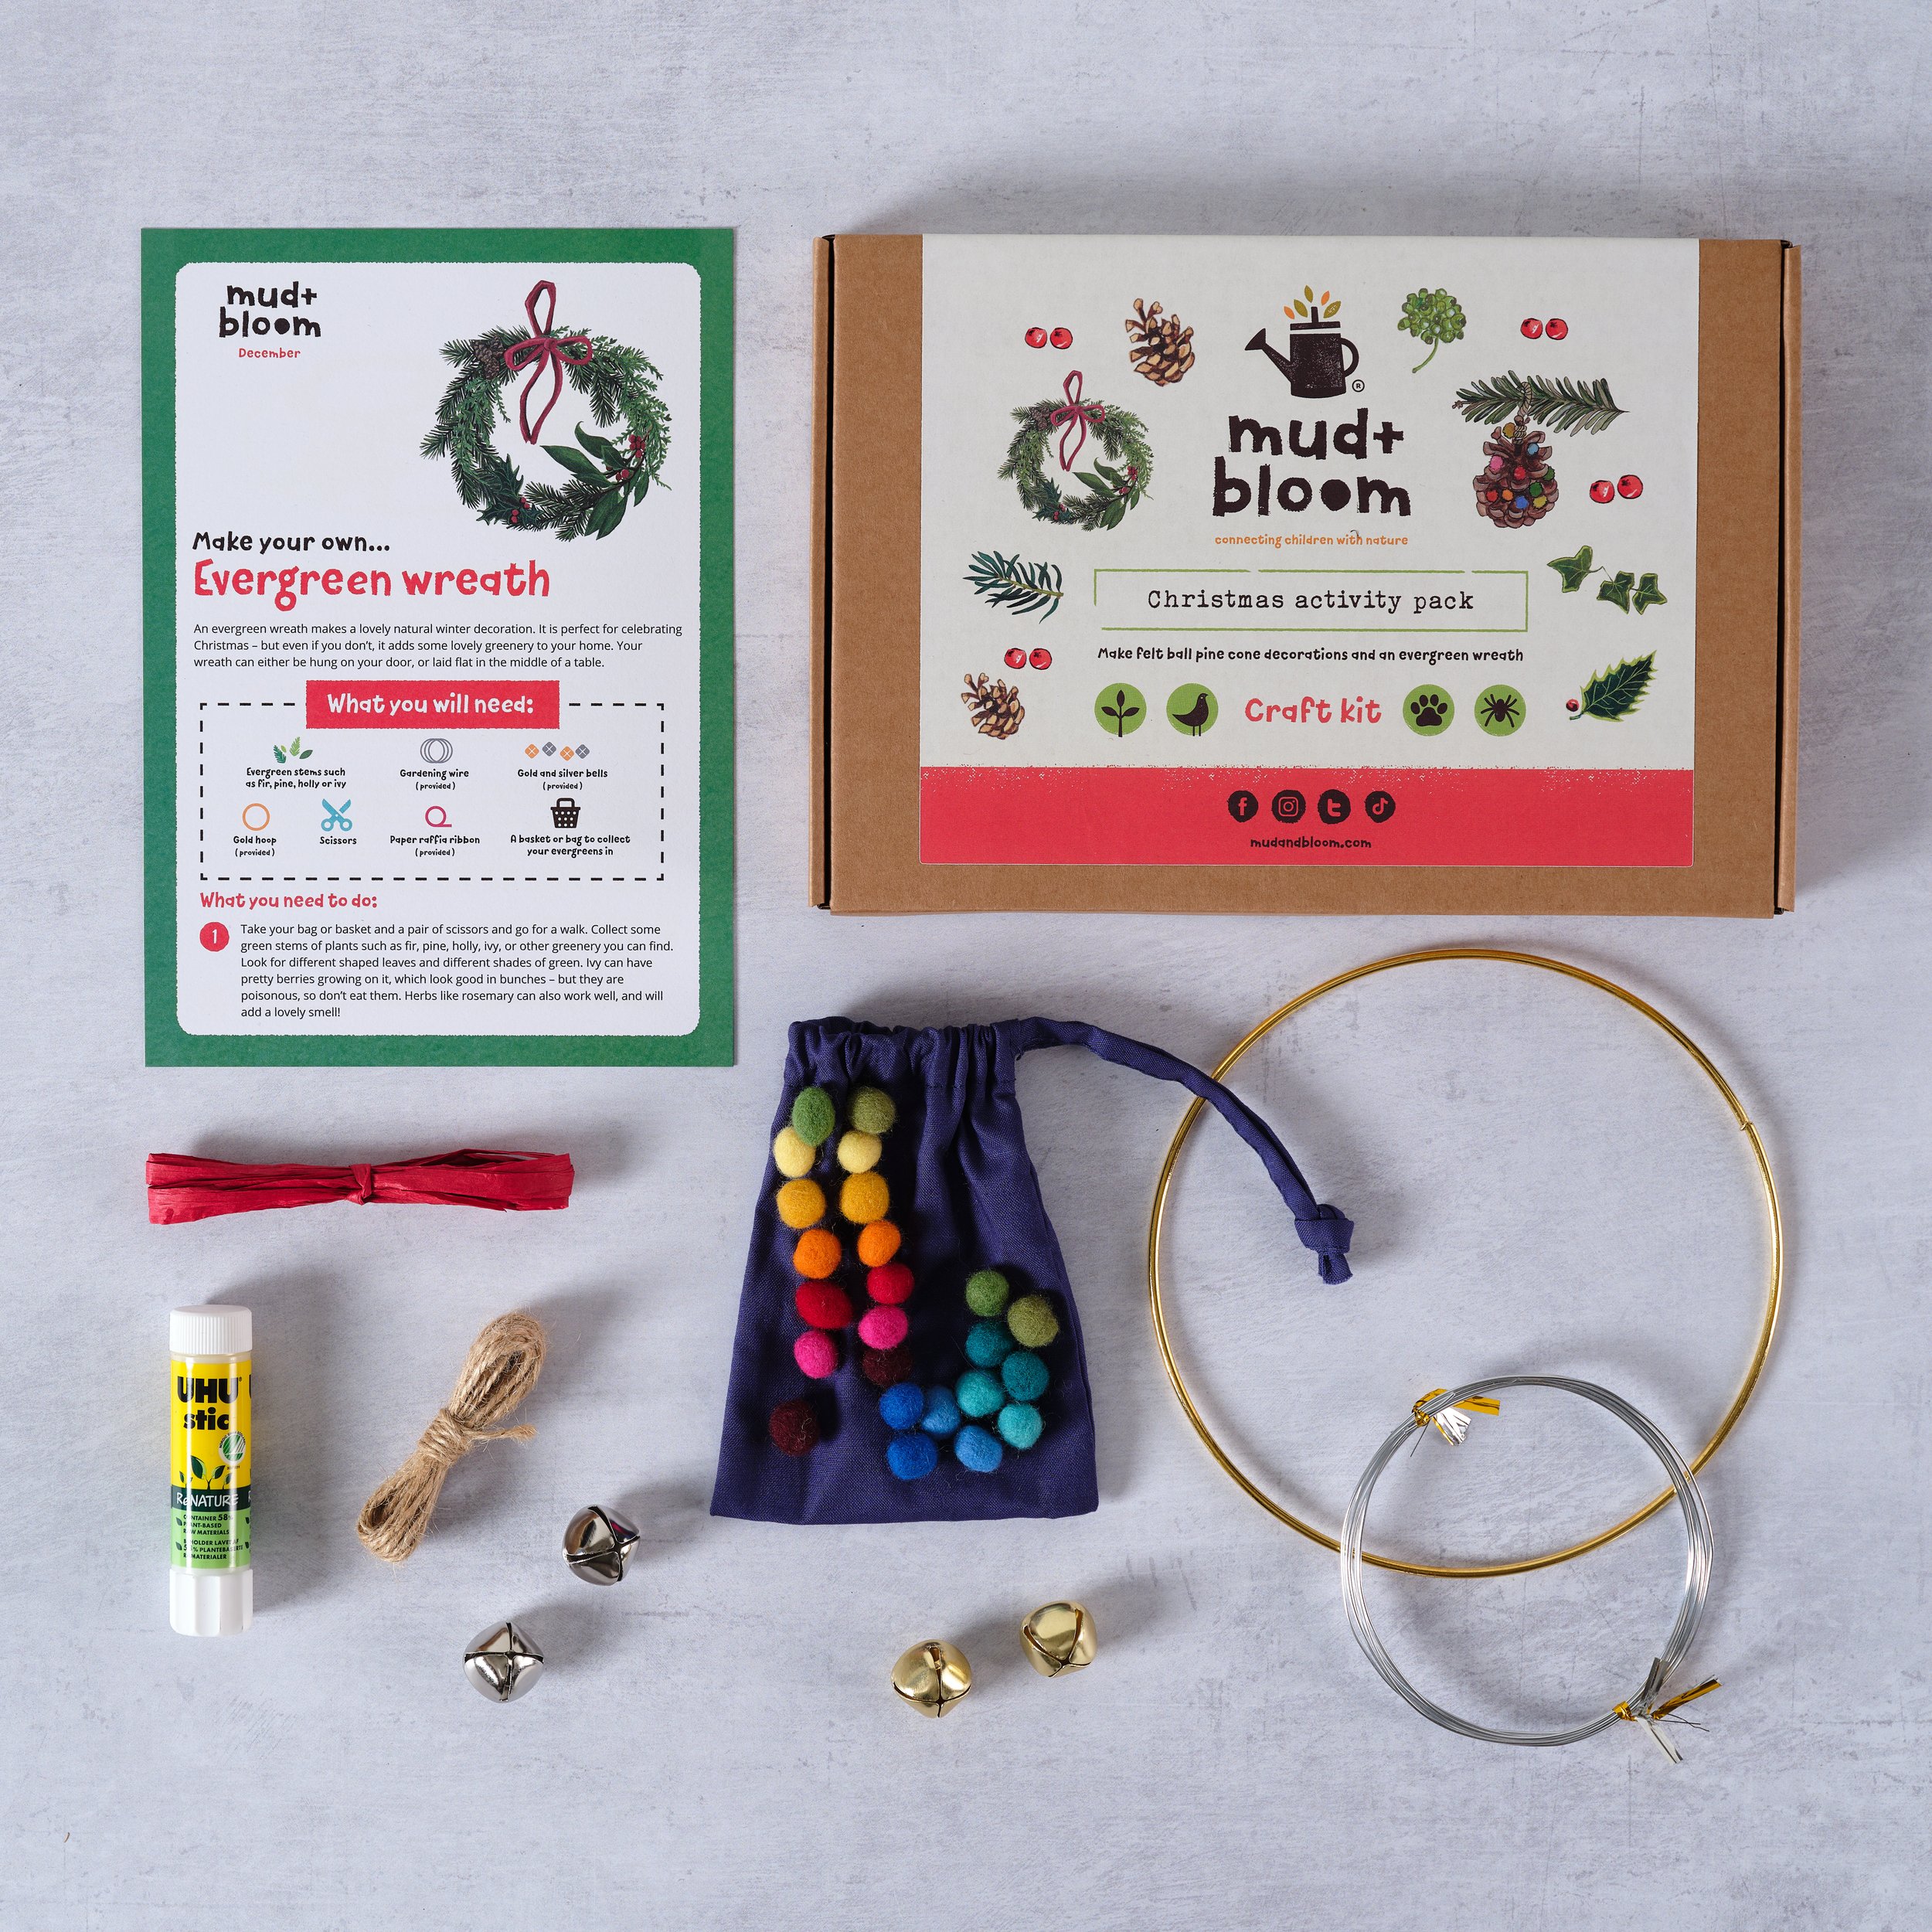 Christmas Craft Kit contents